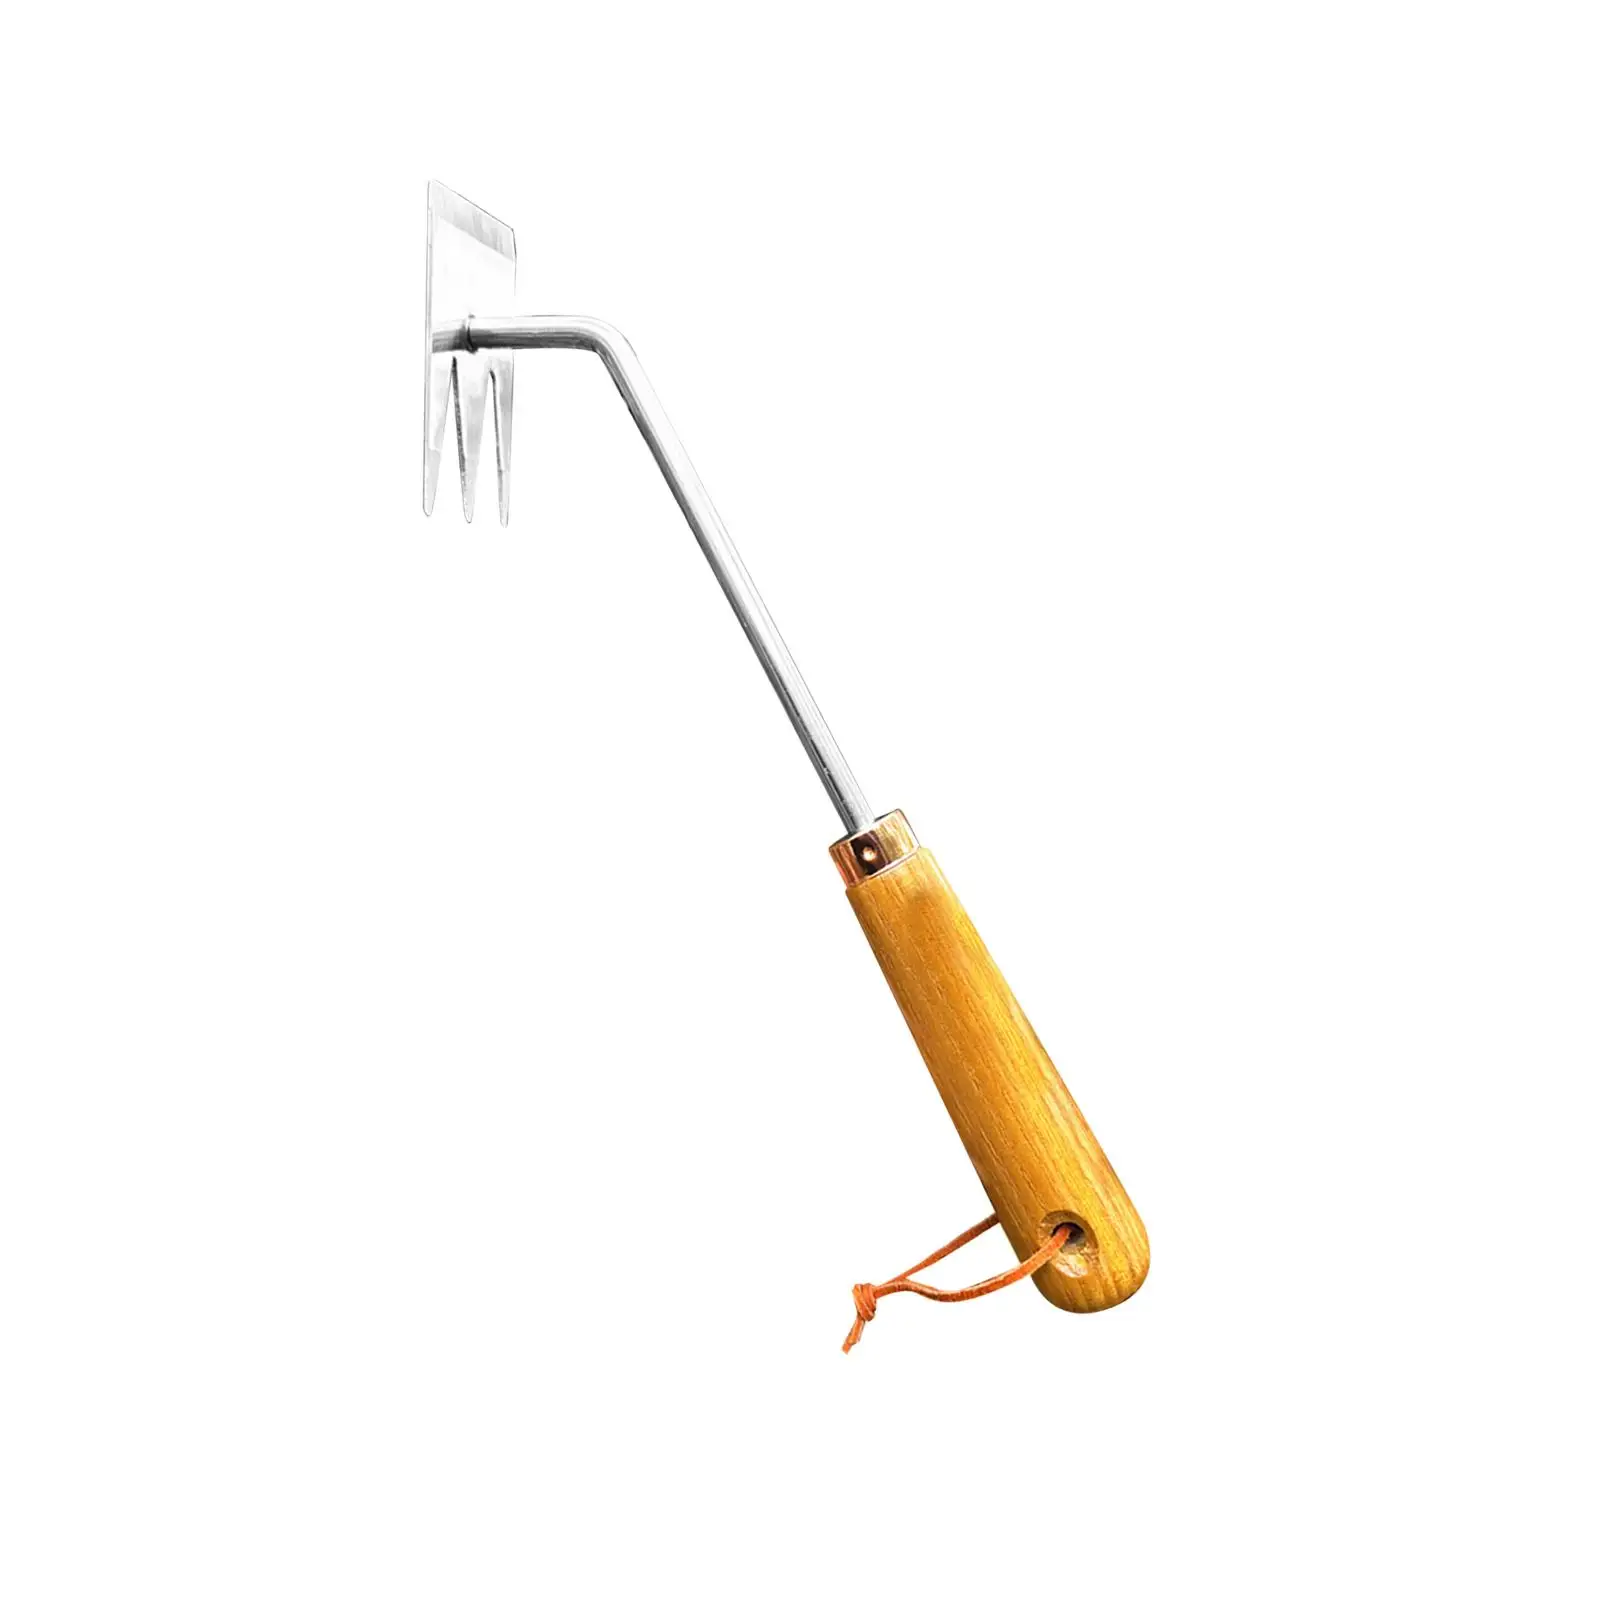 Weeding Tool Save Labors Agricultural Cultivator Digging with Handle Multifunctional Weeder for Garden Lawn Planting Home Yard